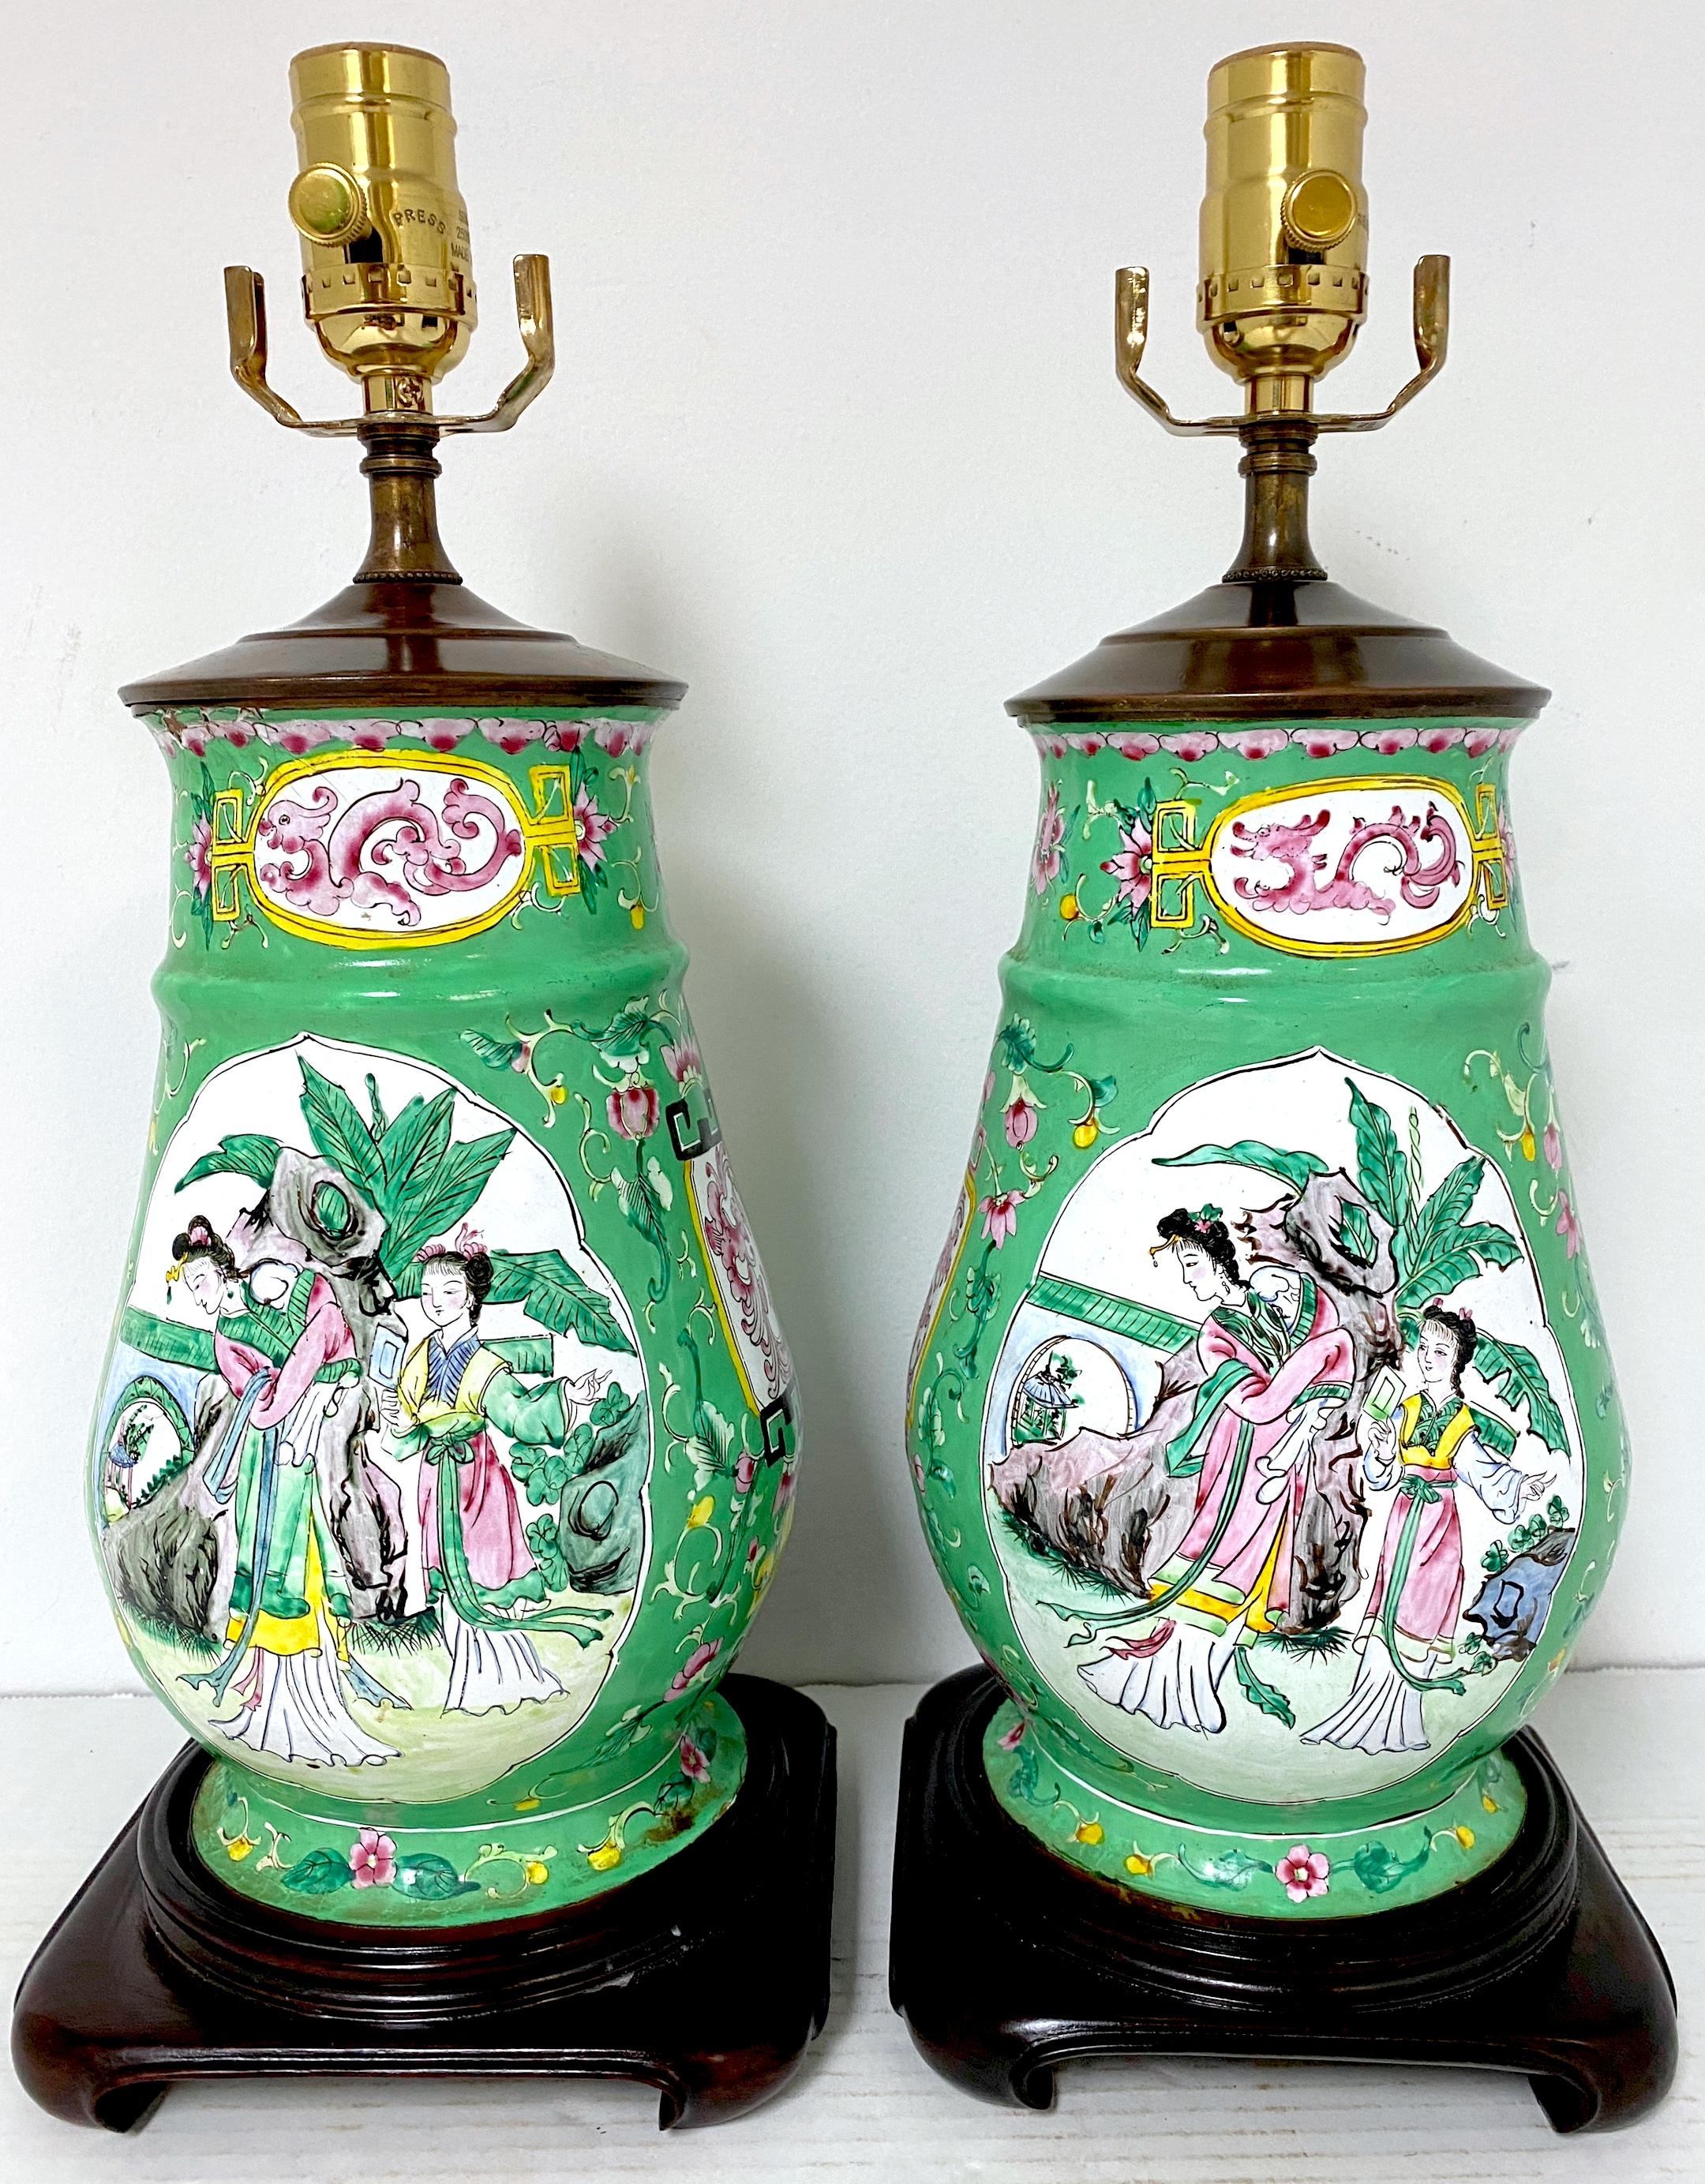 Pair of 20th Century Canton Enamel Mandarin & Bird Motif Vases, Now as Lamps  

An exquisite Pair of 20th Century Canton Enamel Mandarin & Bird Motif Vases, now transformed into lamps. These enchanting vases feature Canton enamel decoration with a